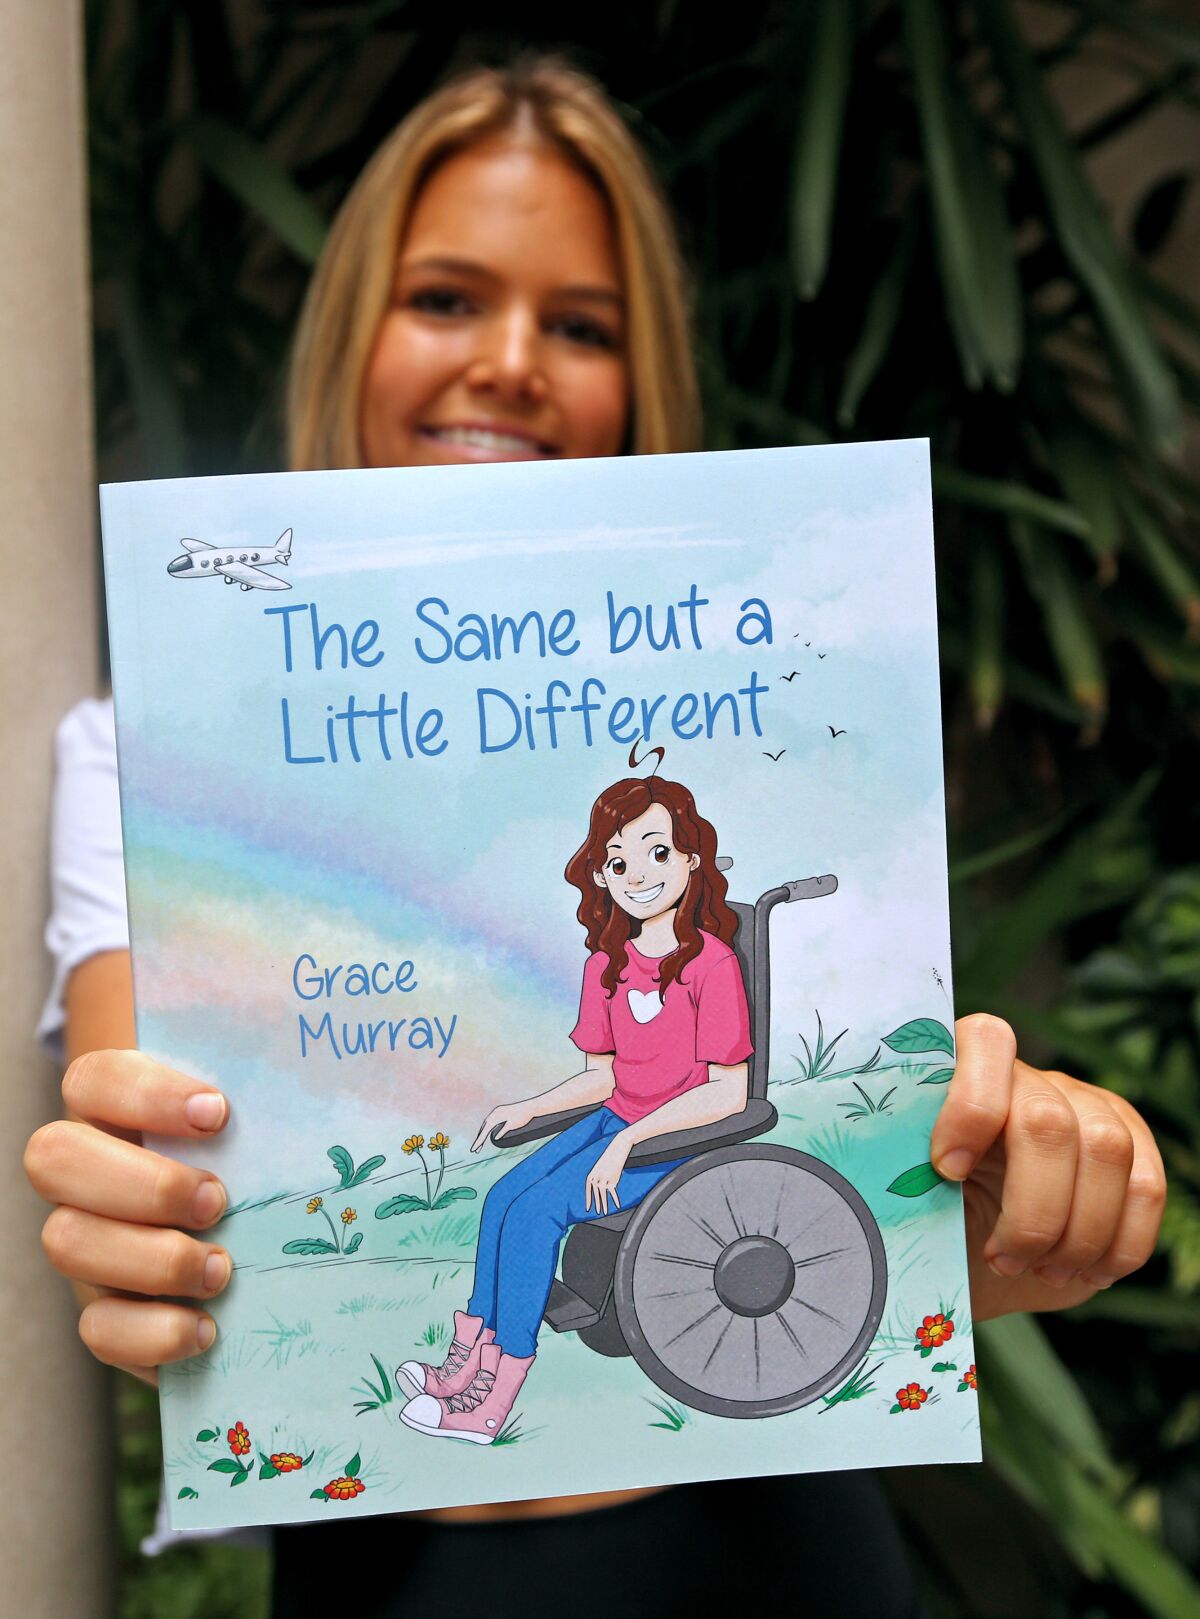 Grace Murray shows off the cover of "The Same But A Little Different" book she self-published.